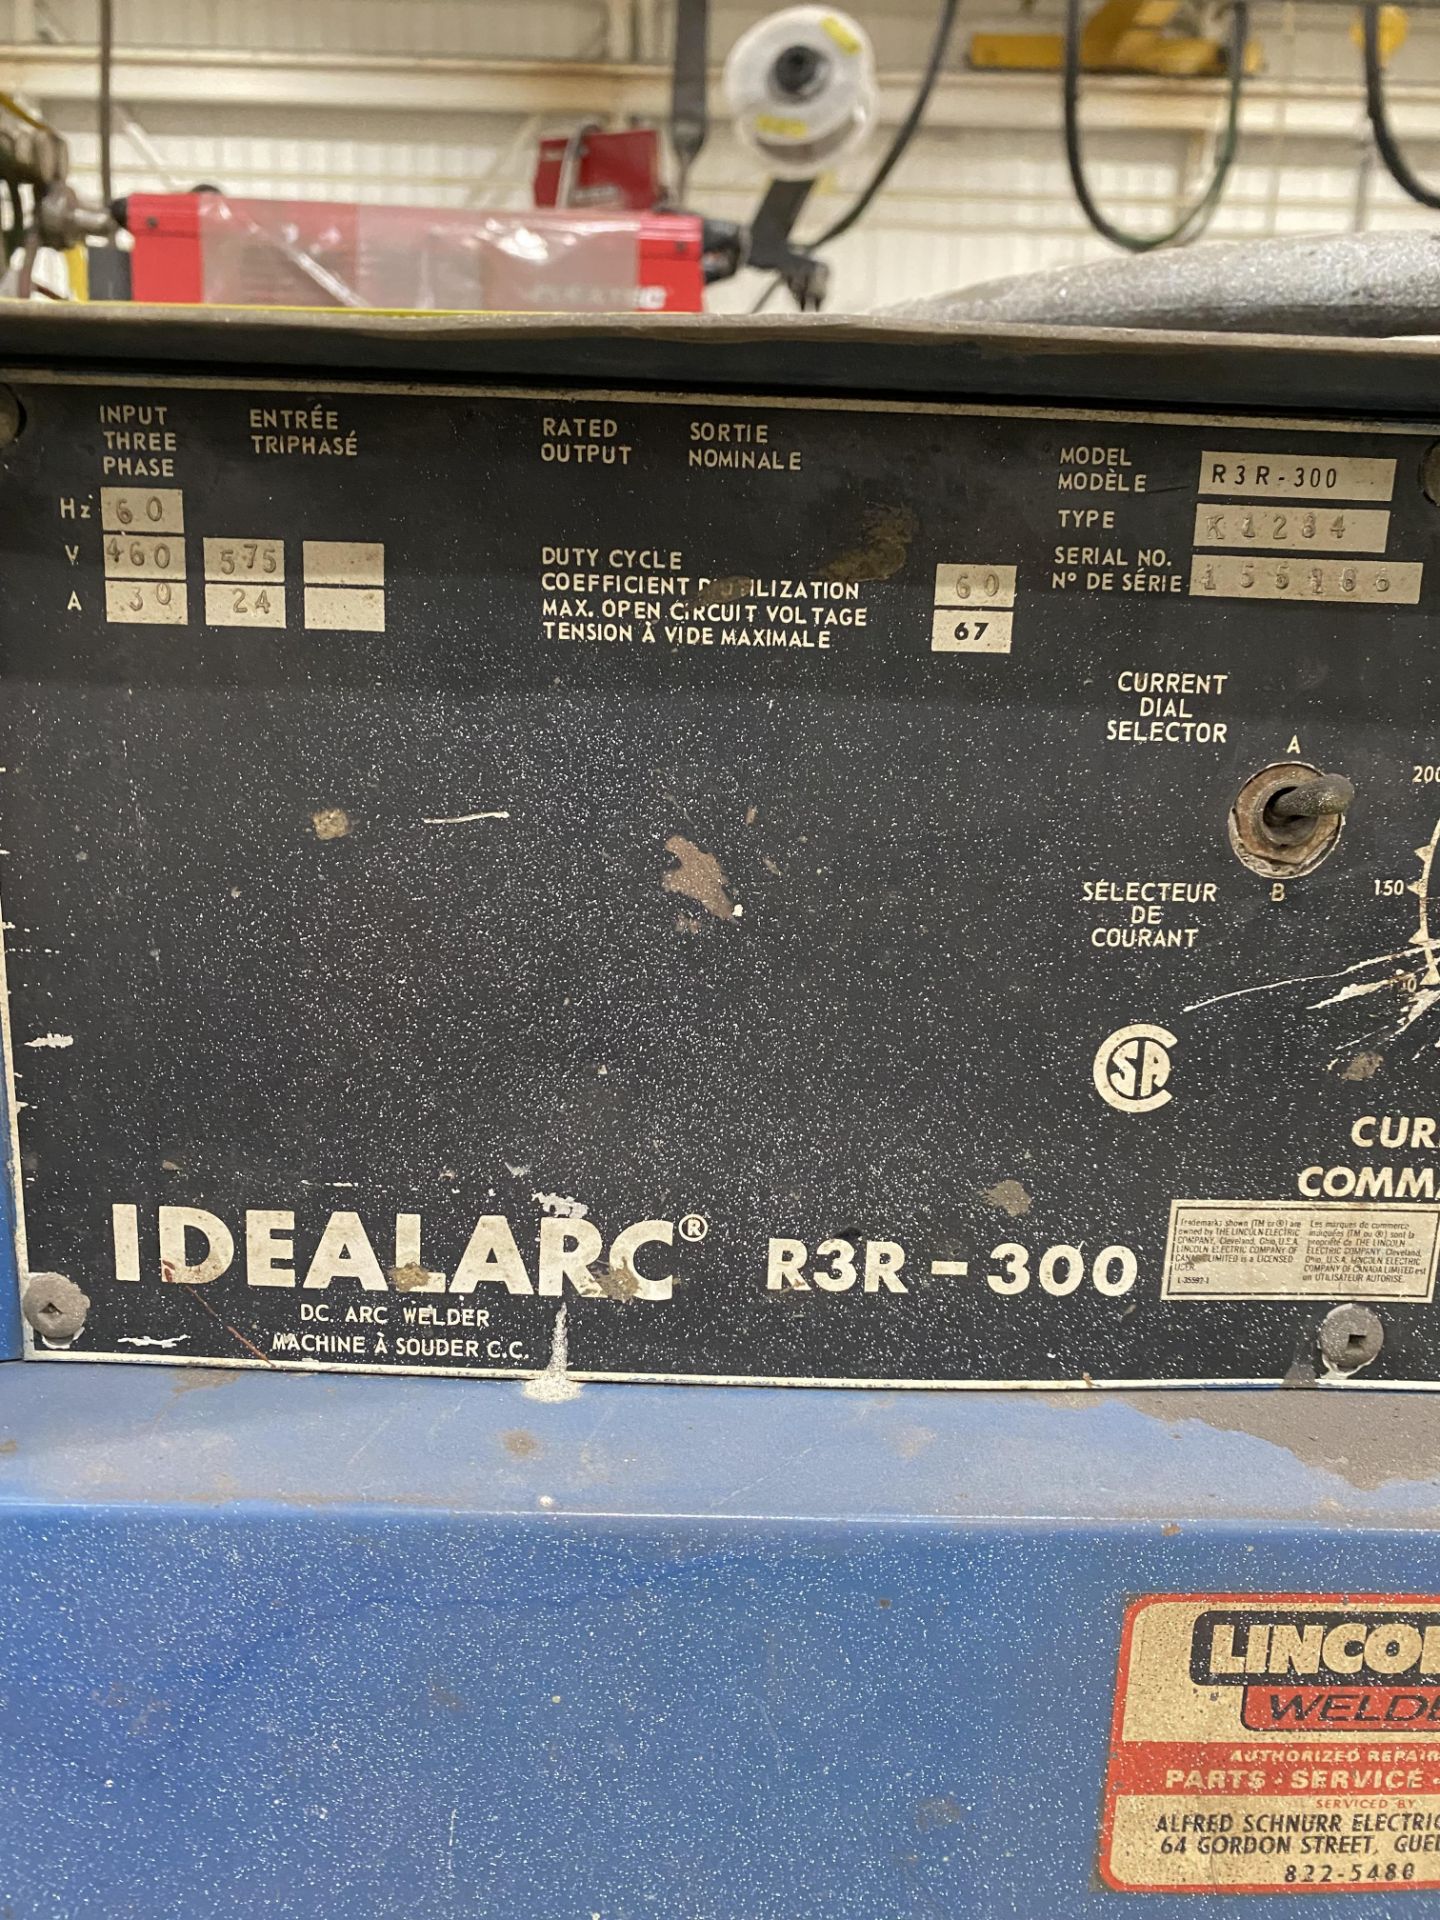 LINCOLN ELECTRIC R3R-300 DC ARC WELDER W/ CART - Image 2 of 4